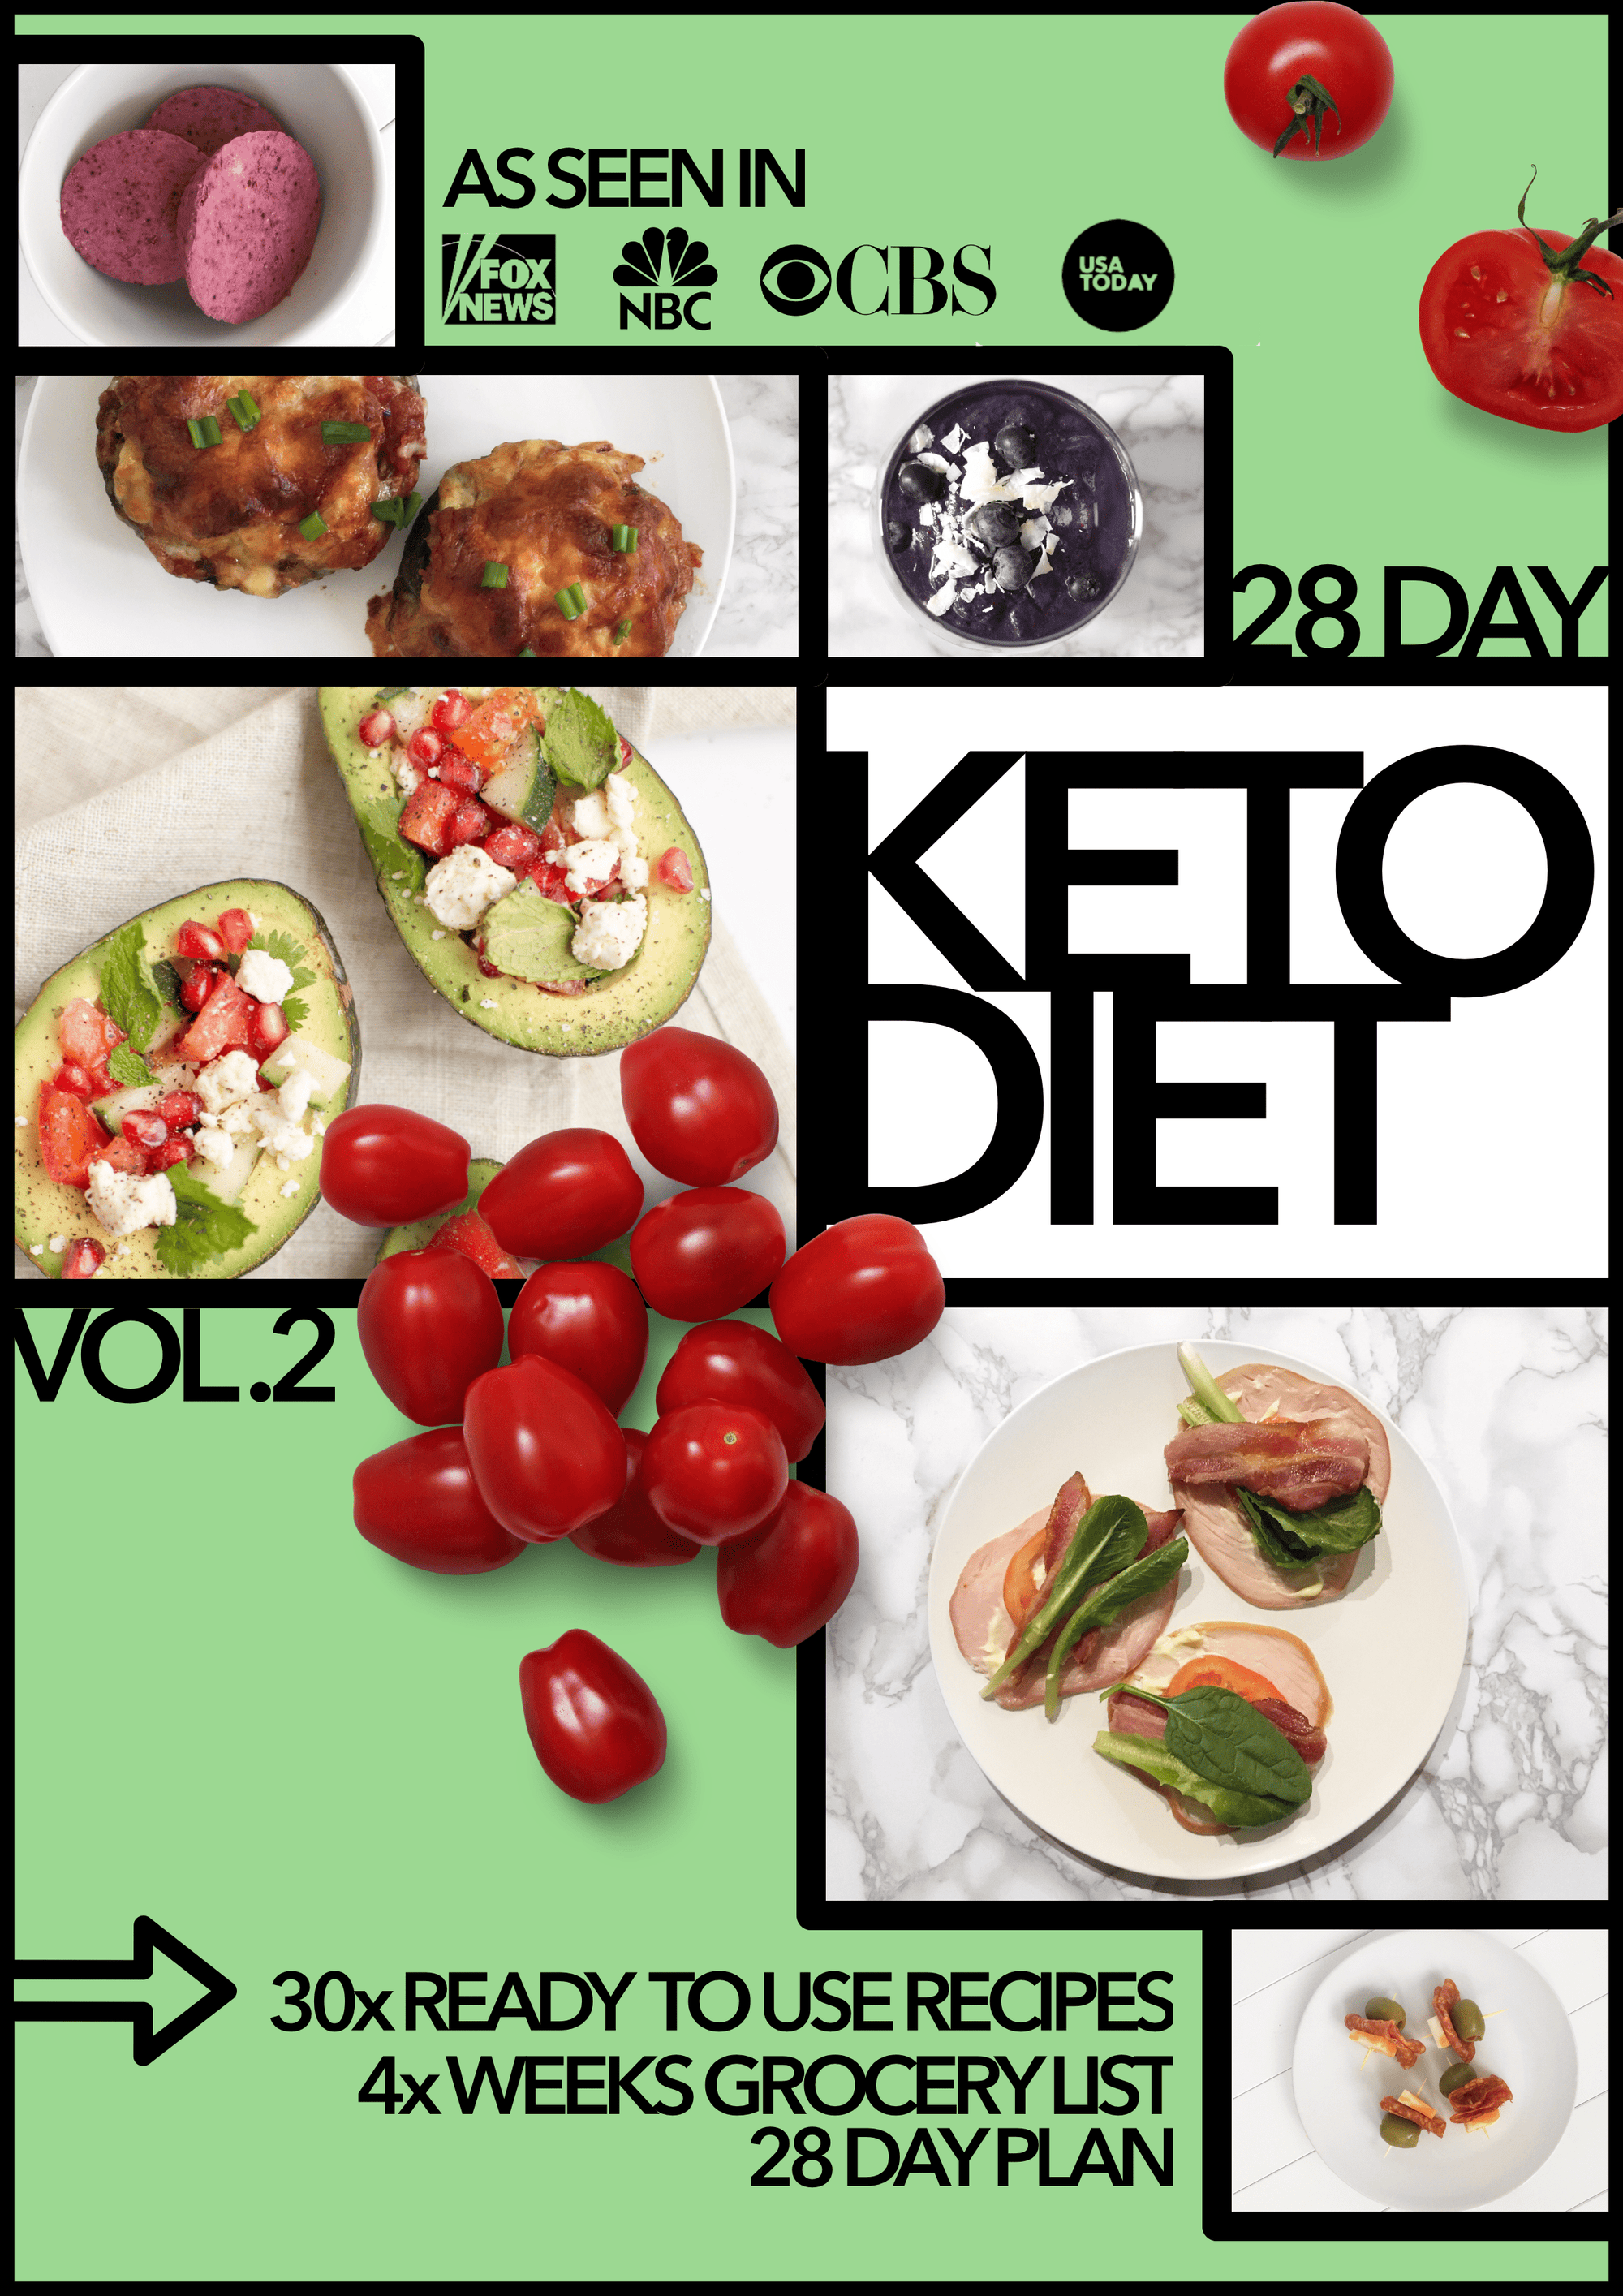 Spartan Fit Nutrition 28 Day Keto Diet Vol. 2 for movement muscle mood and motivation